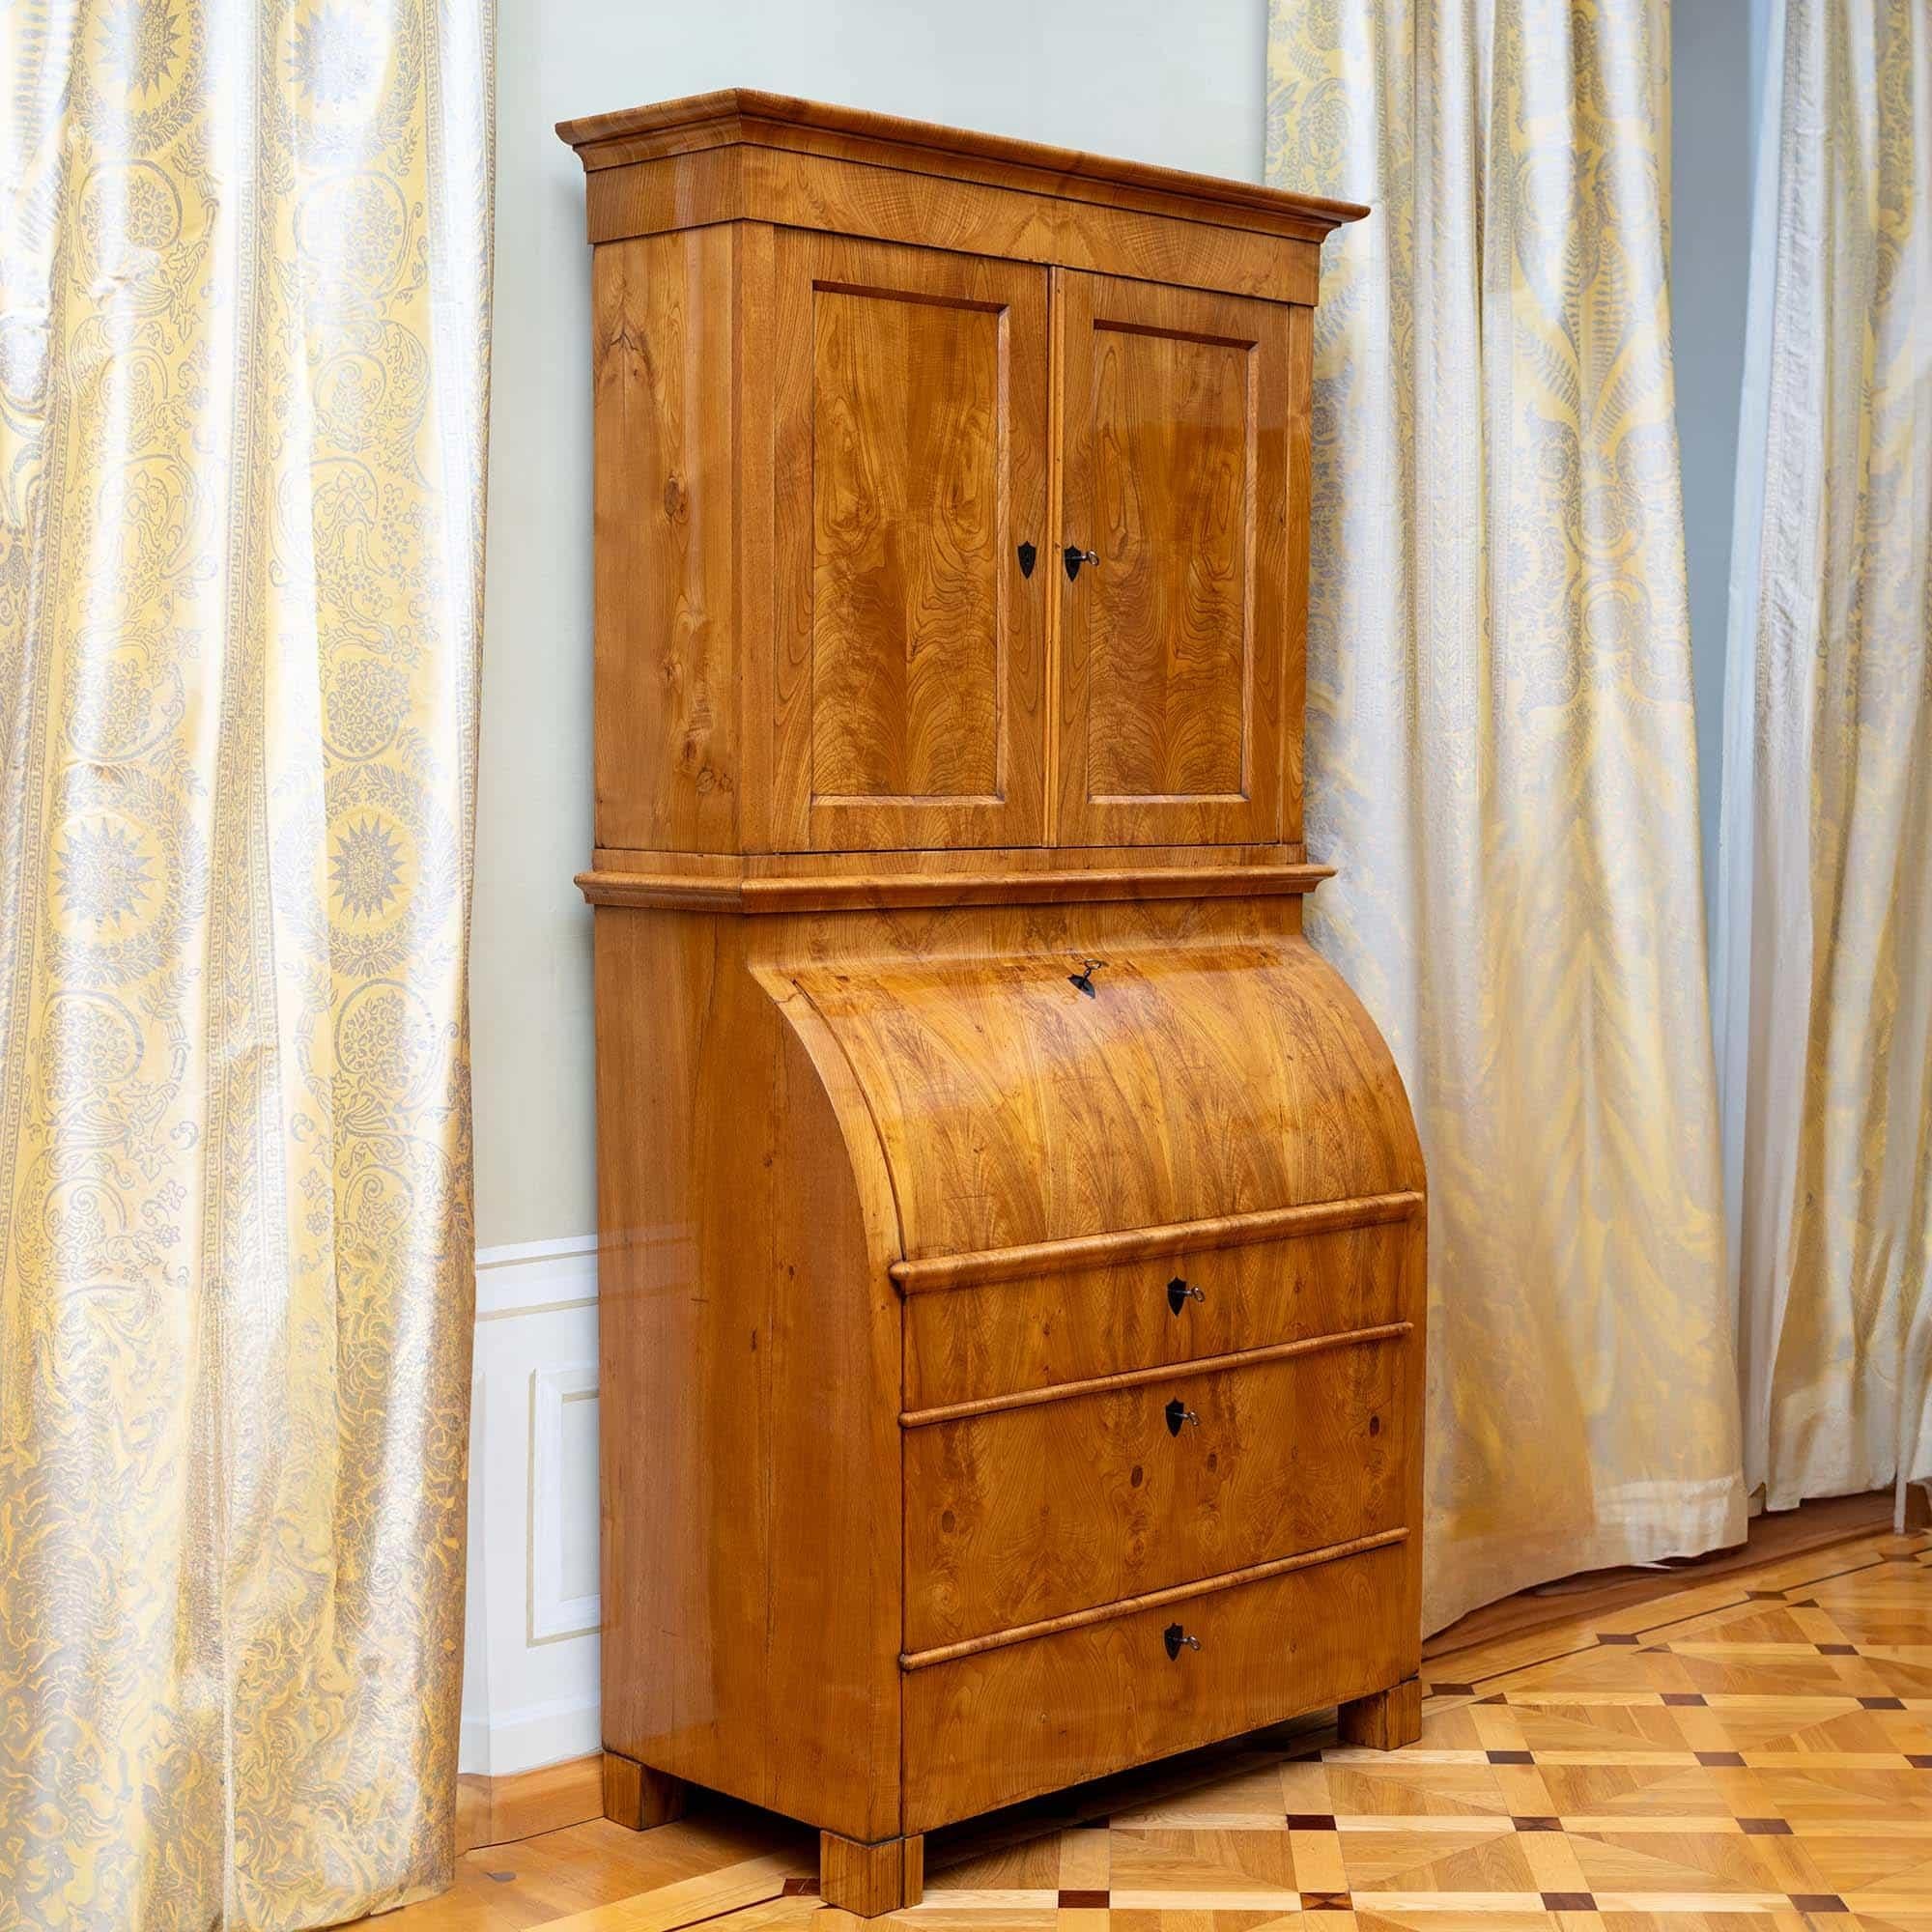 Spacious secretary featuring a two-door cabinet top and a three-tier chest of drawers base. The secretary is veneered with ash and meticulously hand-polished to highlight its natural beauty. The curved writing surface unveils an interior with a